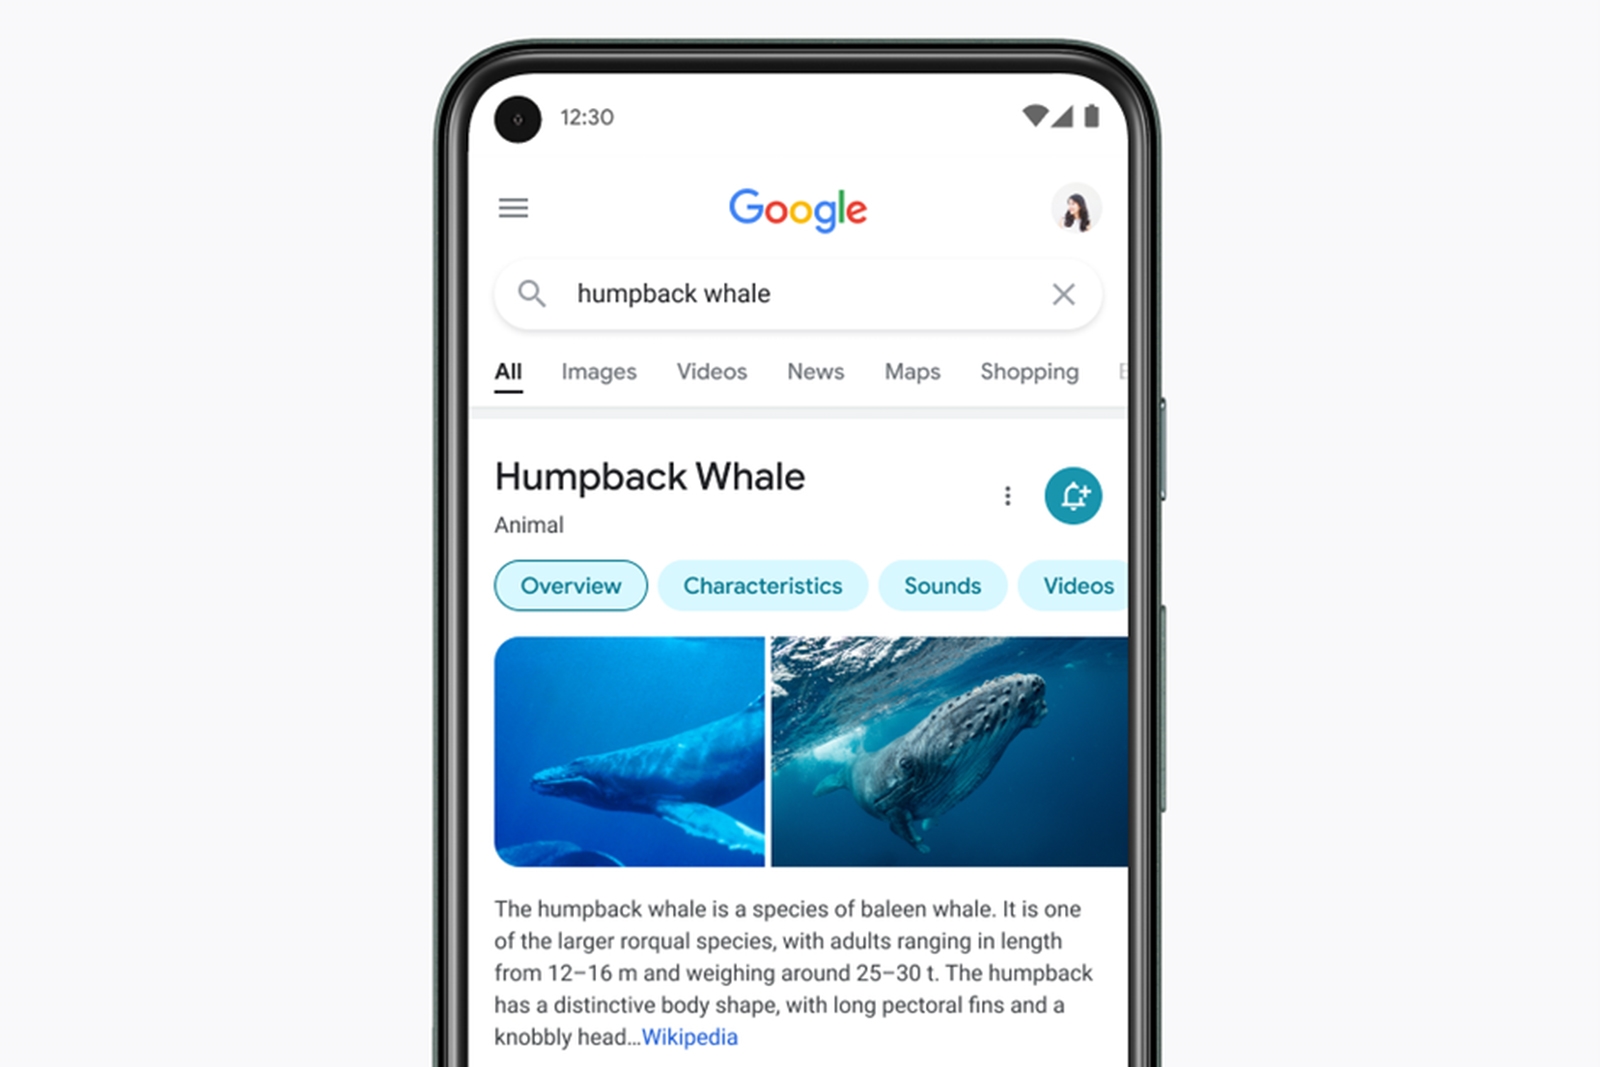 Google mobile search redesign focuses on results, not frills | DeviceDaily.com